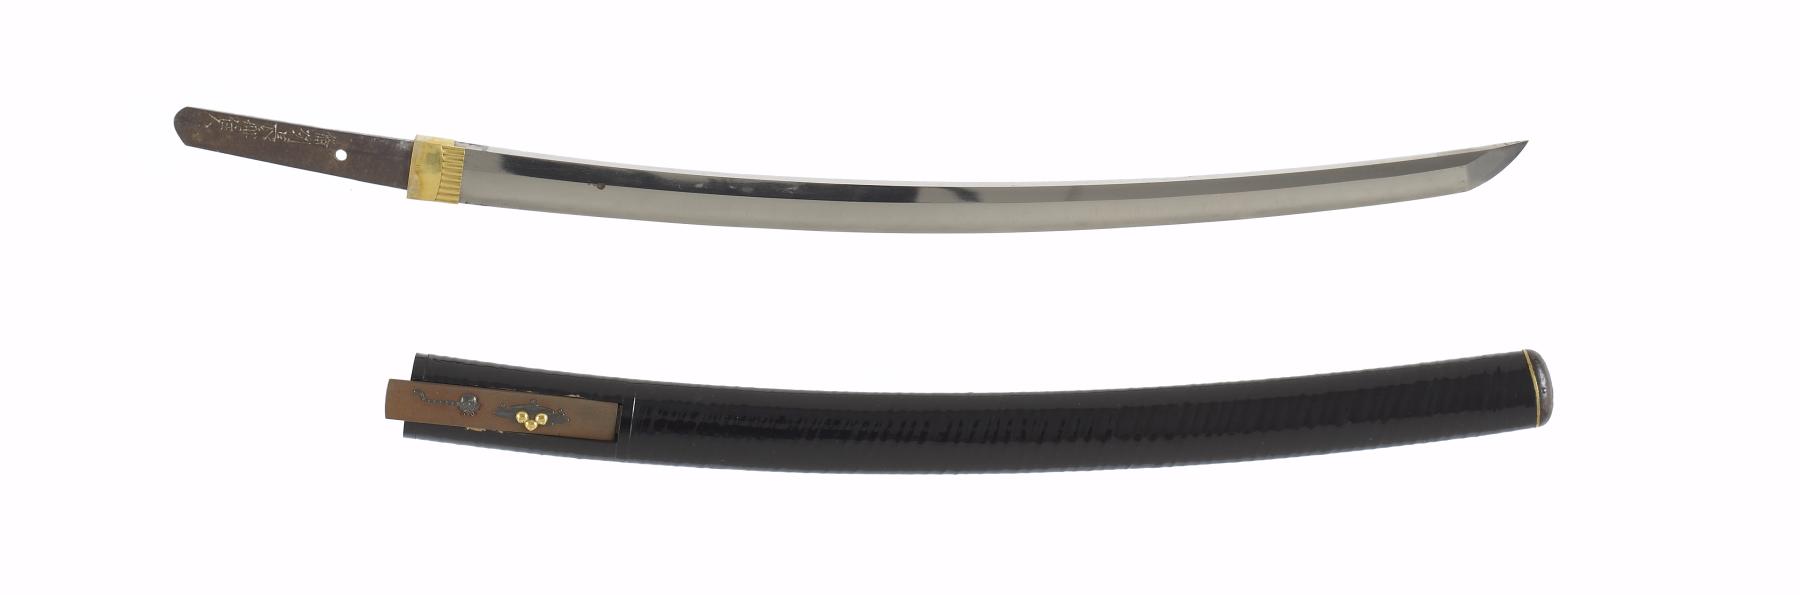 Image for Short sword (wakizashi) with dark brown lacquer saya with diagonal ridges (includes 51.1262.1-51.1262.4)